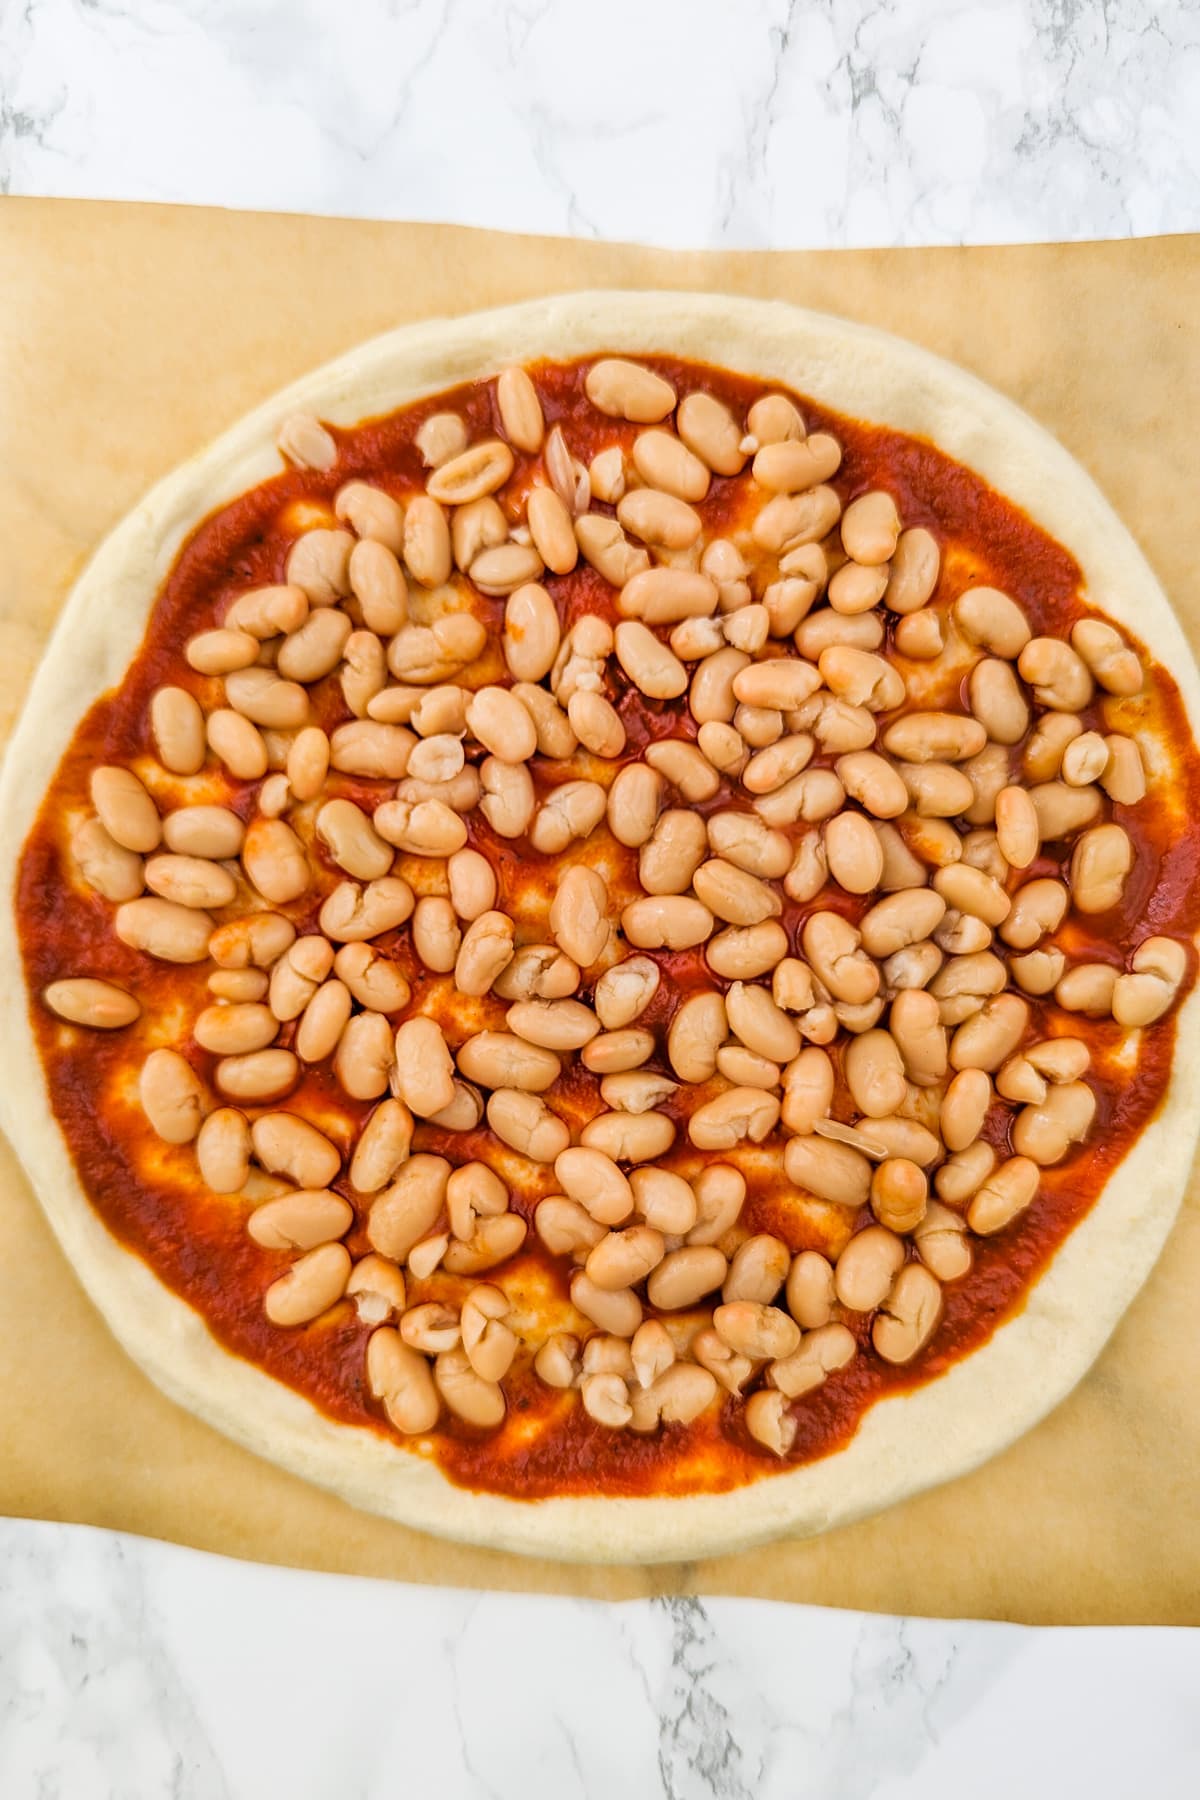 Top view of a raw pizza dough covered with pizza sauce and canned beans.